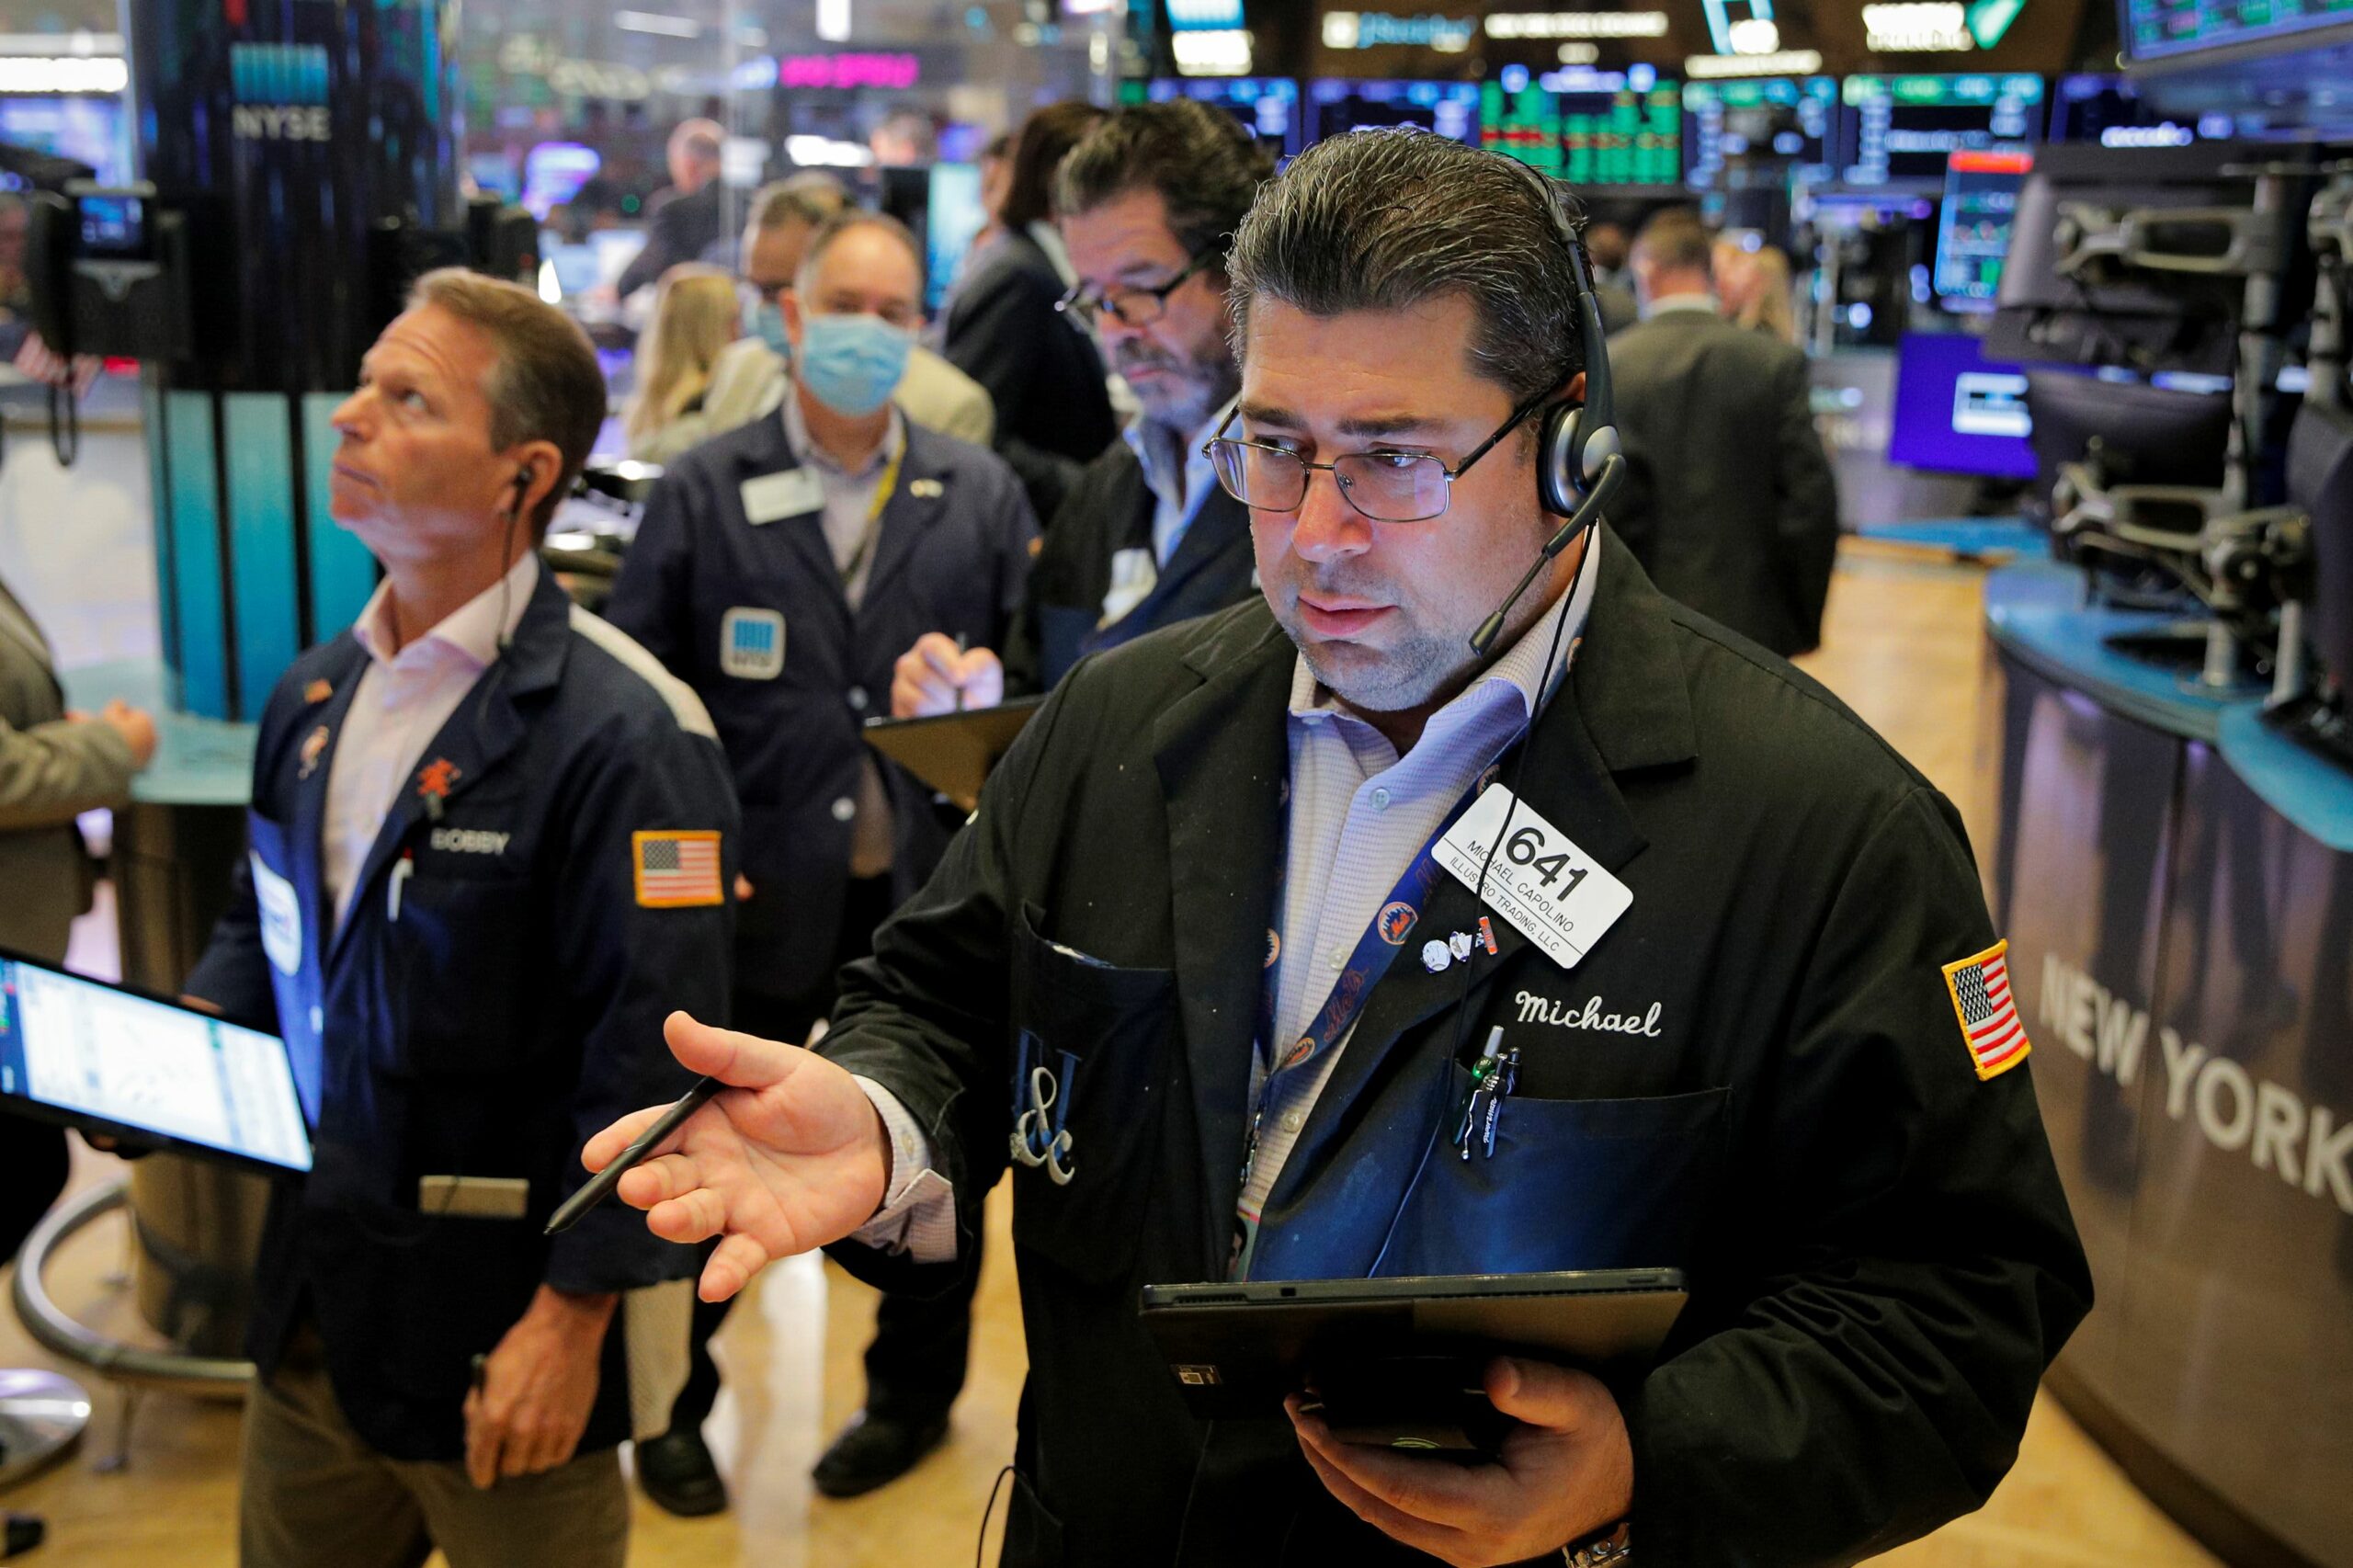 Jim Cramer says Monday’s market bounce may not be finished, stocks can go higher this week